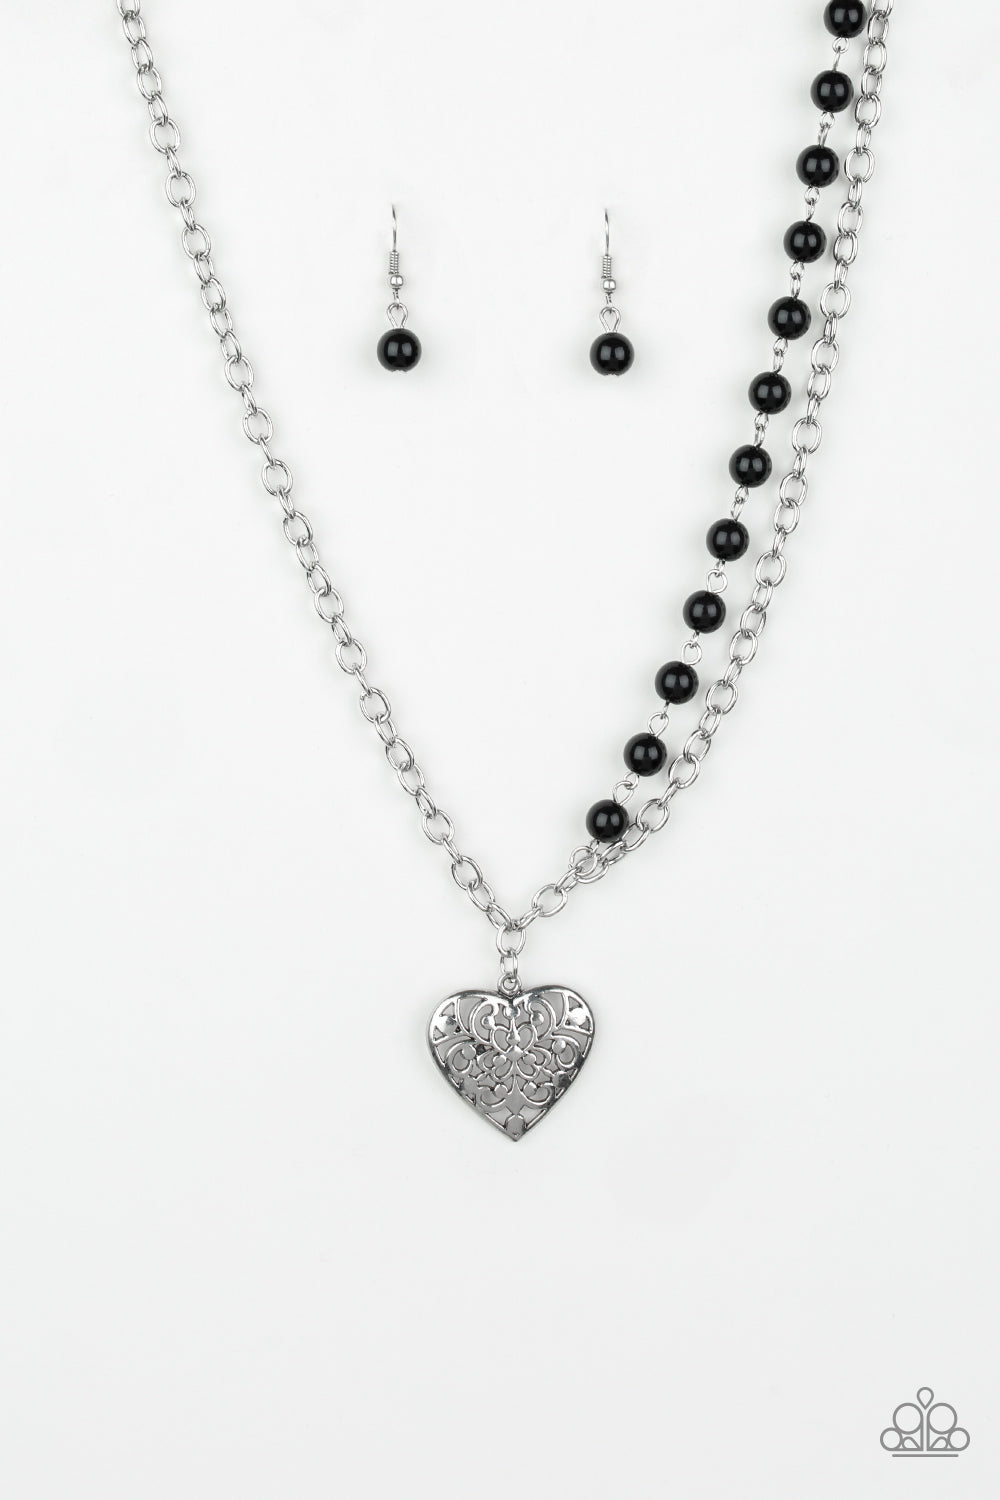 Paparazzi necklace - Forever In My Heart - Black